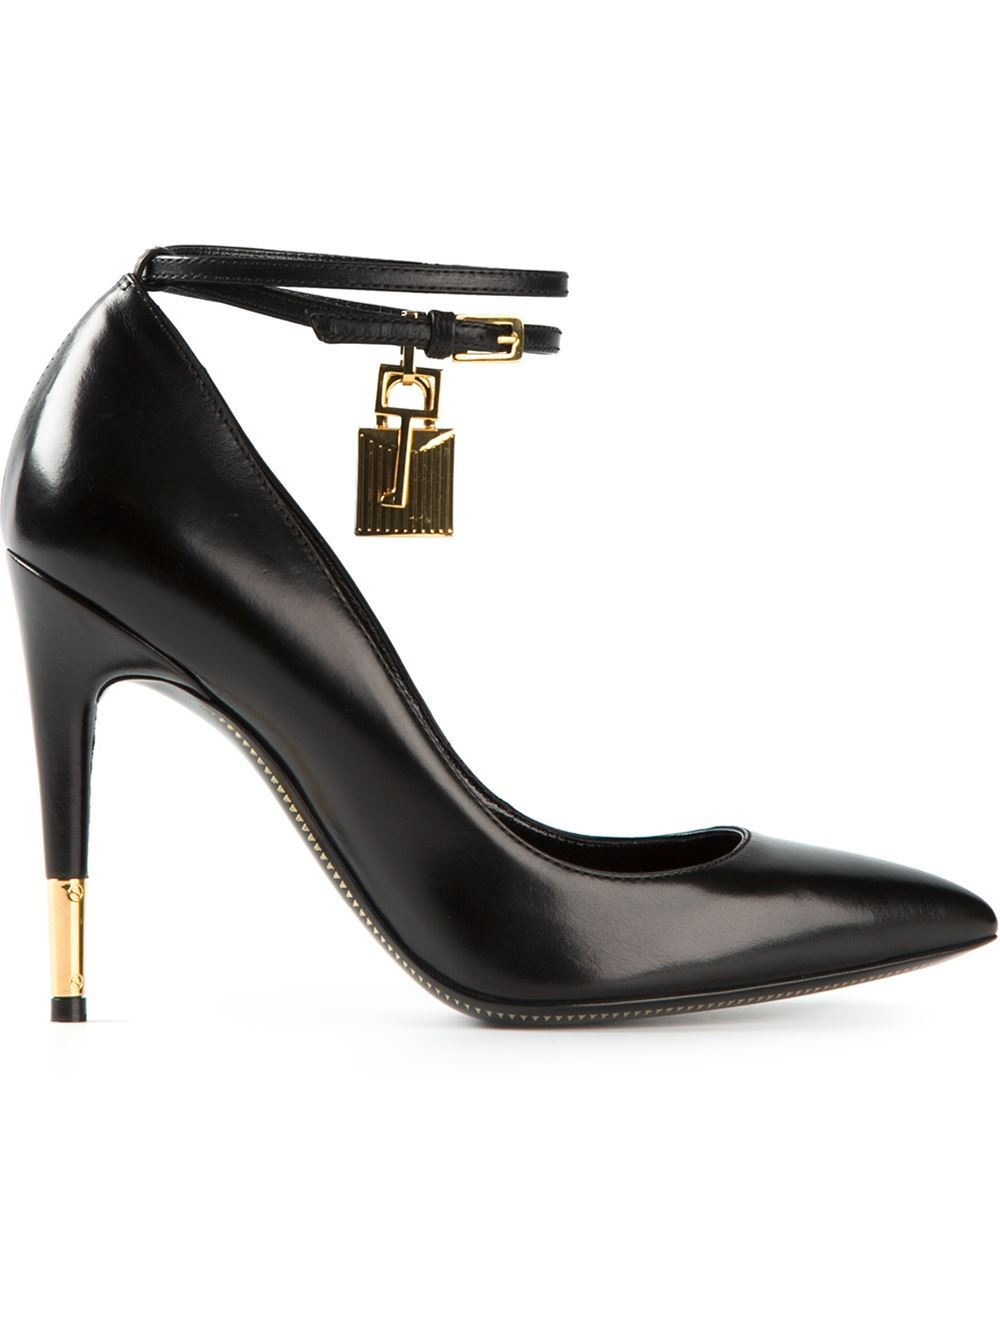 Lyst - Tom Ford Padlock and Key Pumps in Black